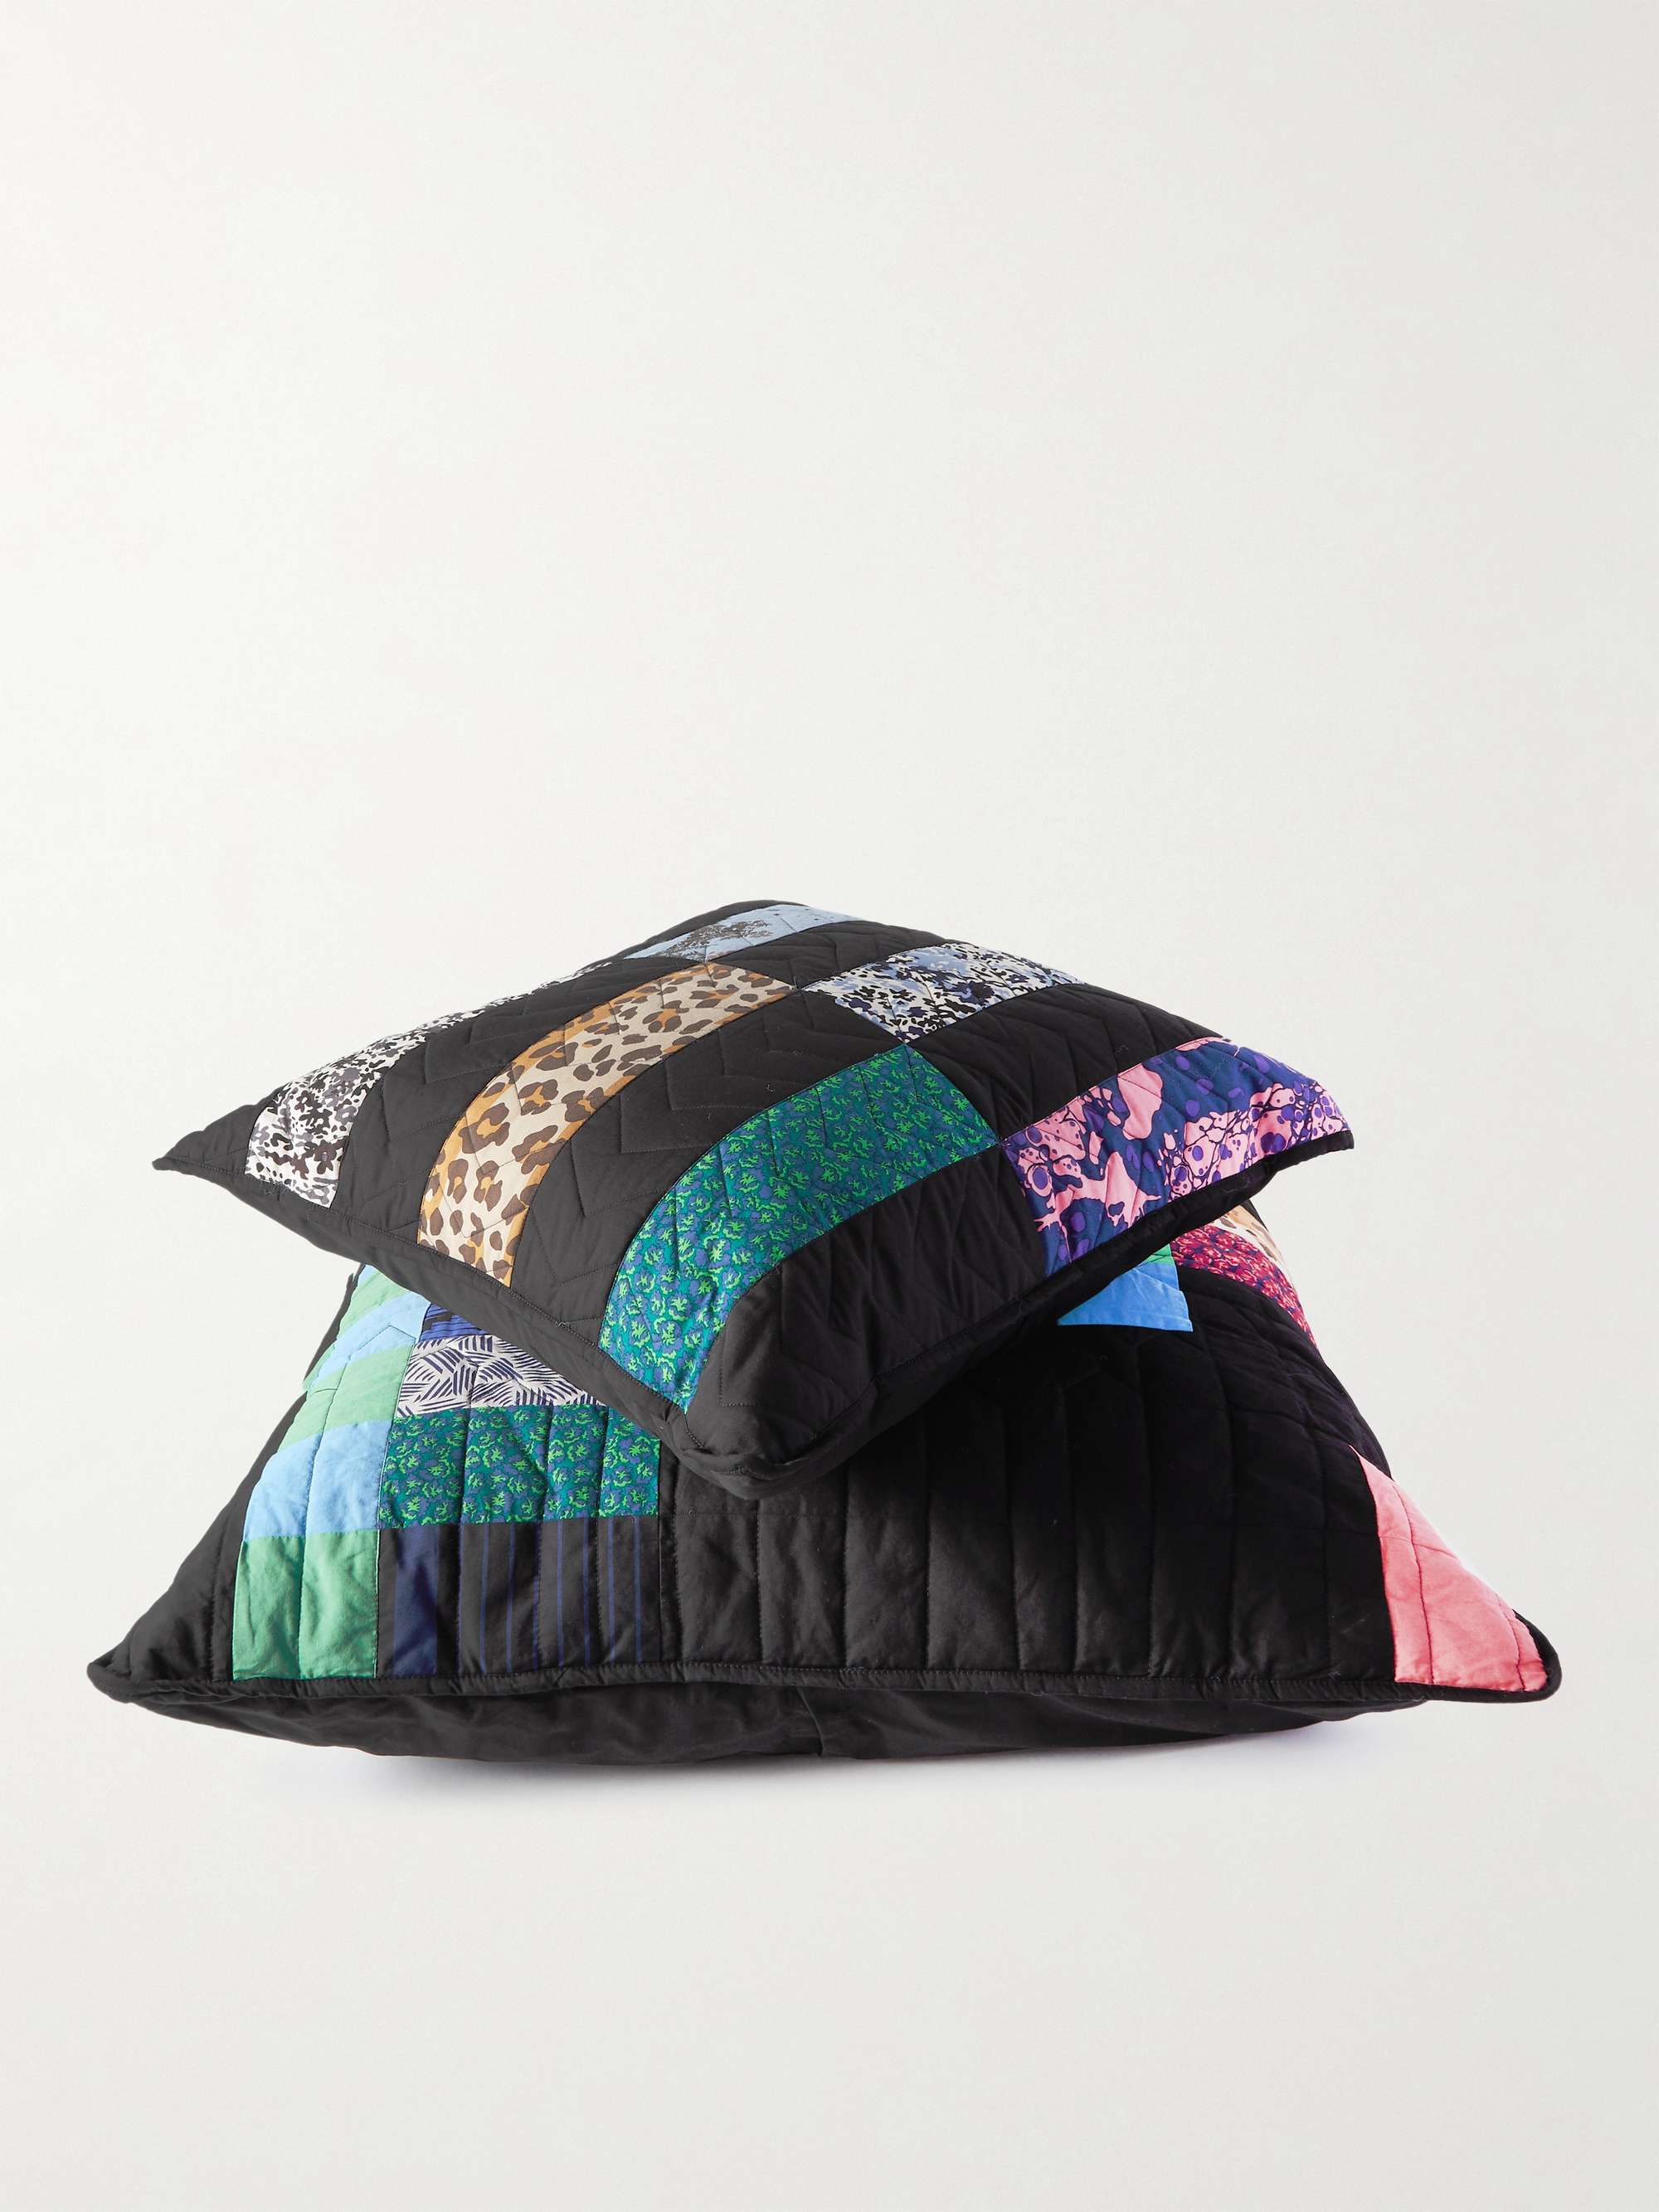 NOMA T.D. Medium Quilted Patchwork Cotton Cushion